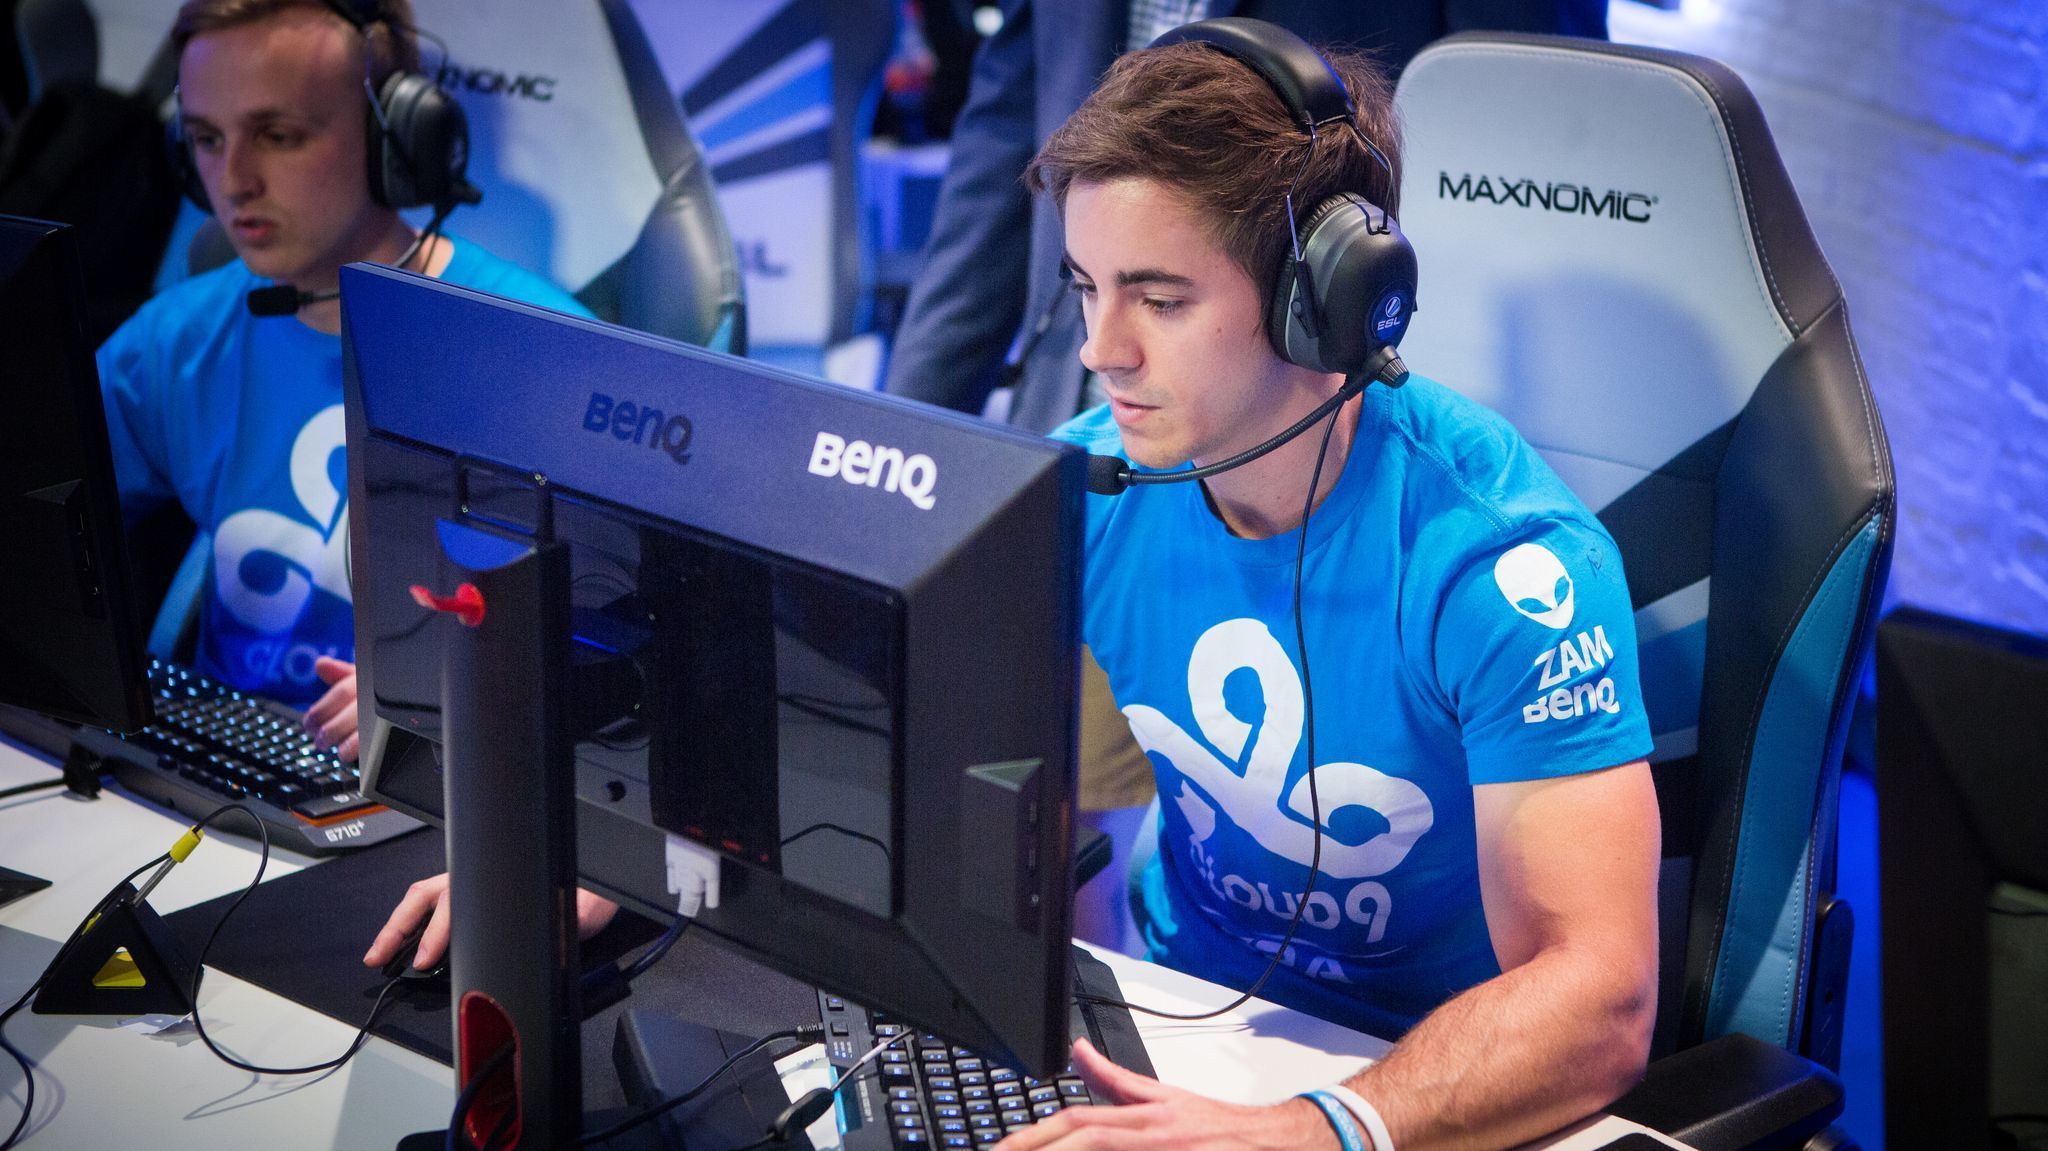 Sean Gares, who competes with teammates in professional tournaments for "Counter-Strike: Global Offensive," is seen during a match in 2015.